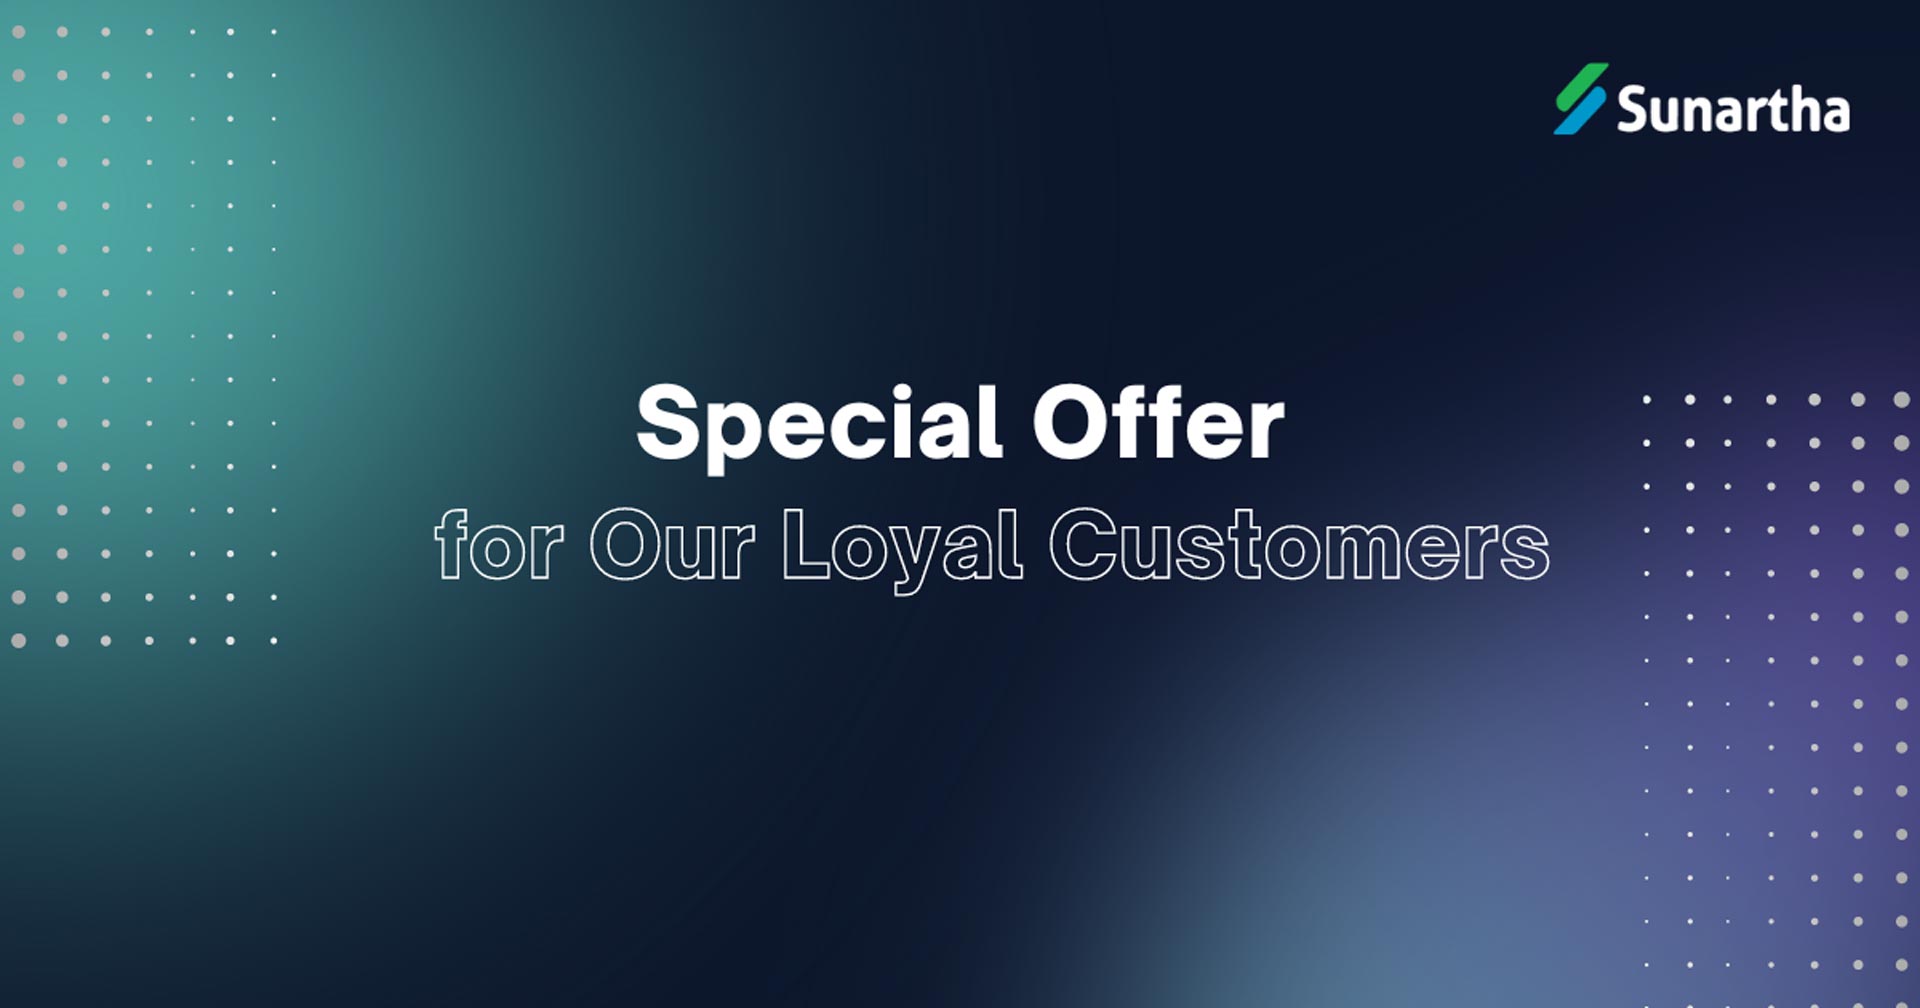 Sunartha Promo Special Offer for Loyal Customers